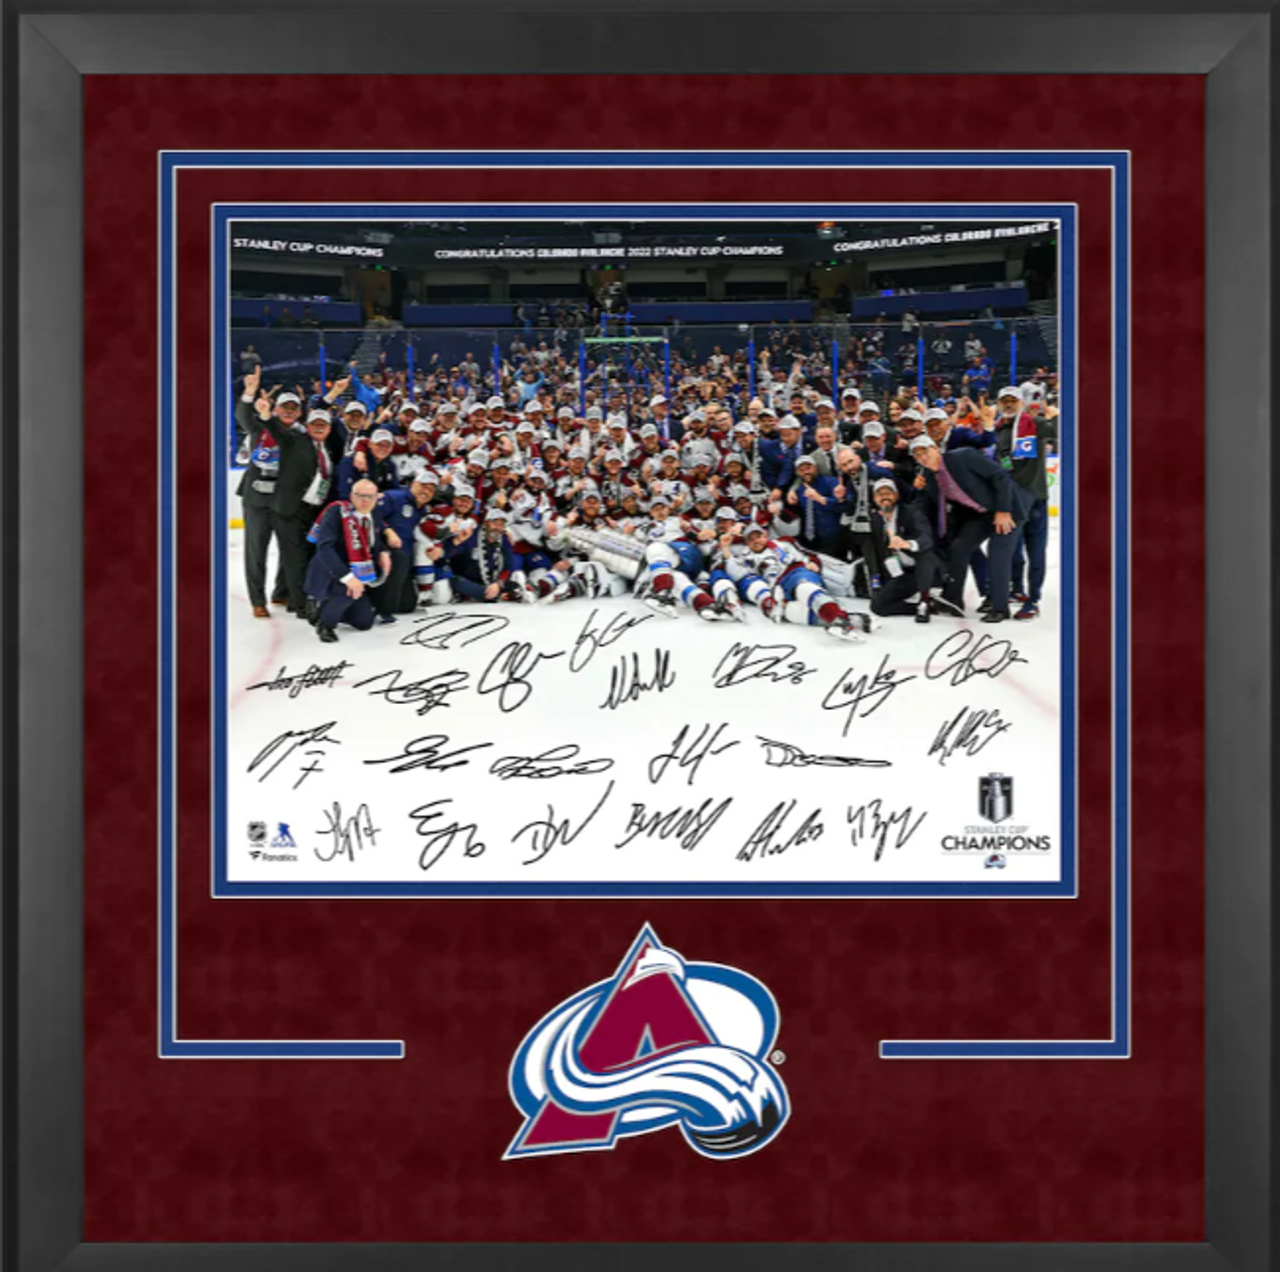 https://cdn11.bigcommerce.com/s-5738z7chff/images/stencil/1280x1280/products/52554/39083/Colorado-Avalanche-Autographed-Deluxe-Framed-2022-Stanley-Cup-Champions-16-x-20-Team-Photograph-with-Multiple-Signatures__91748.1656360472.png?c=2